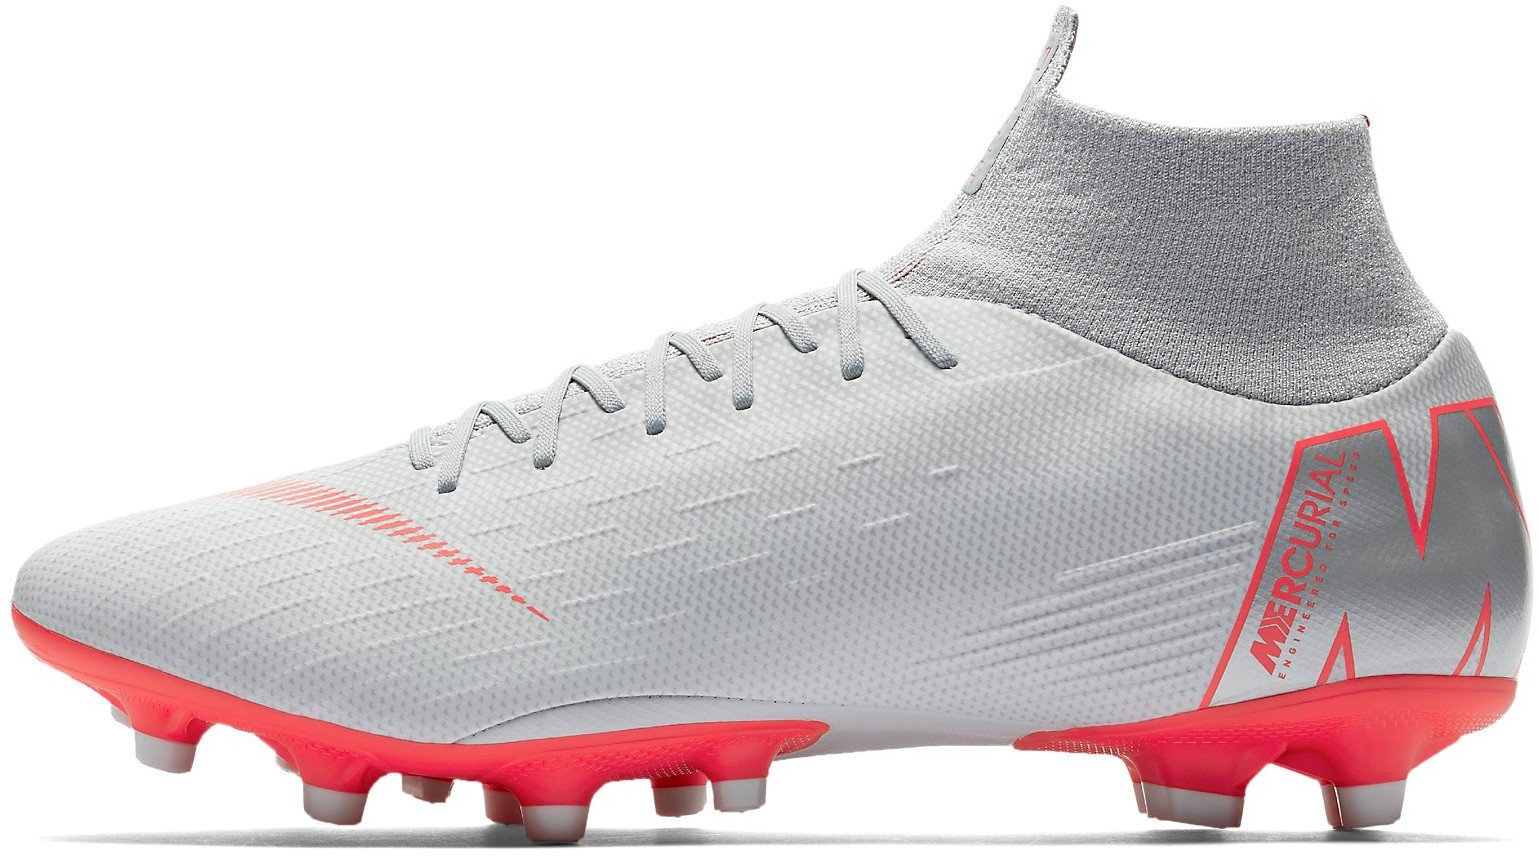 Buy Nike Mercurial Superfly VI Pro Firm Ground Only C $ 154.